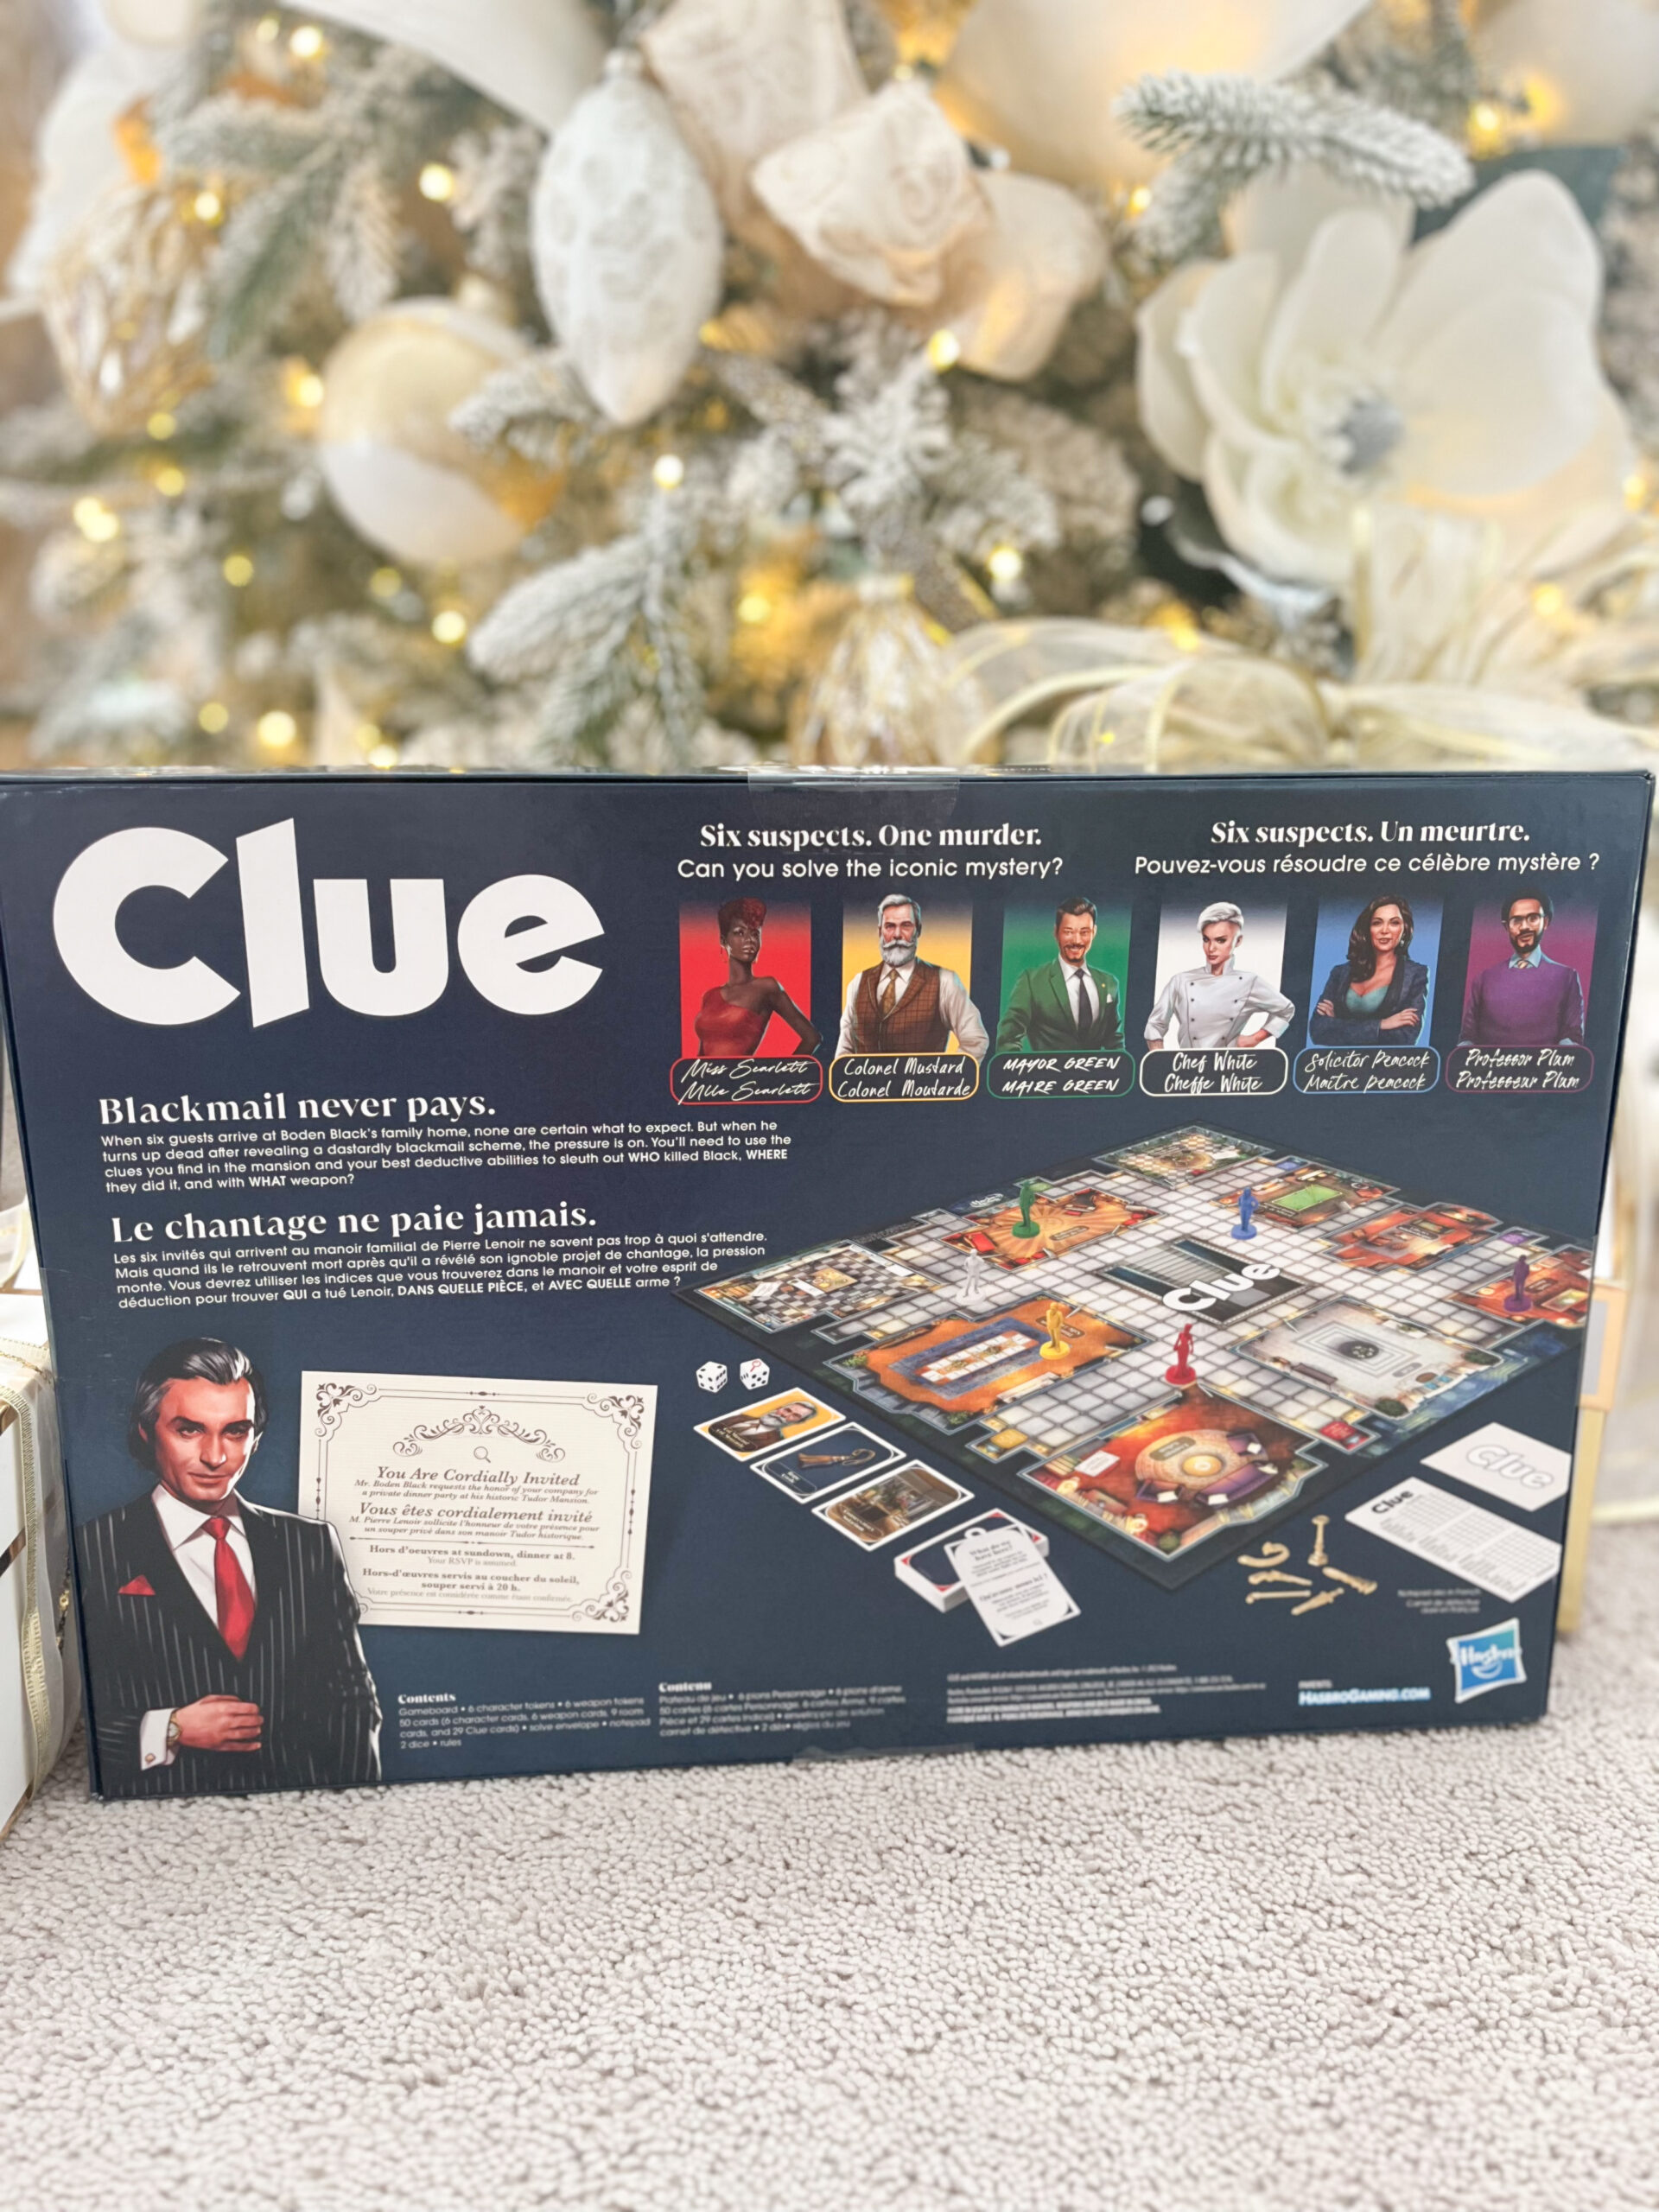 Hasbro Gift Guide for Kids 2023 on Livin' Life with Style 